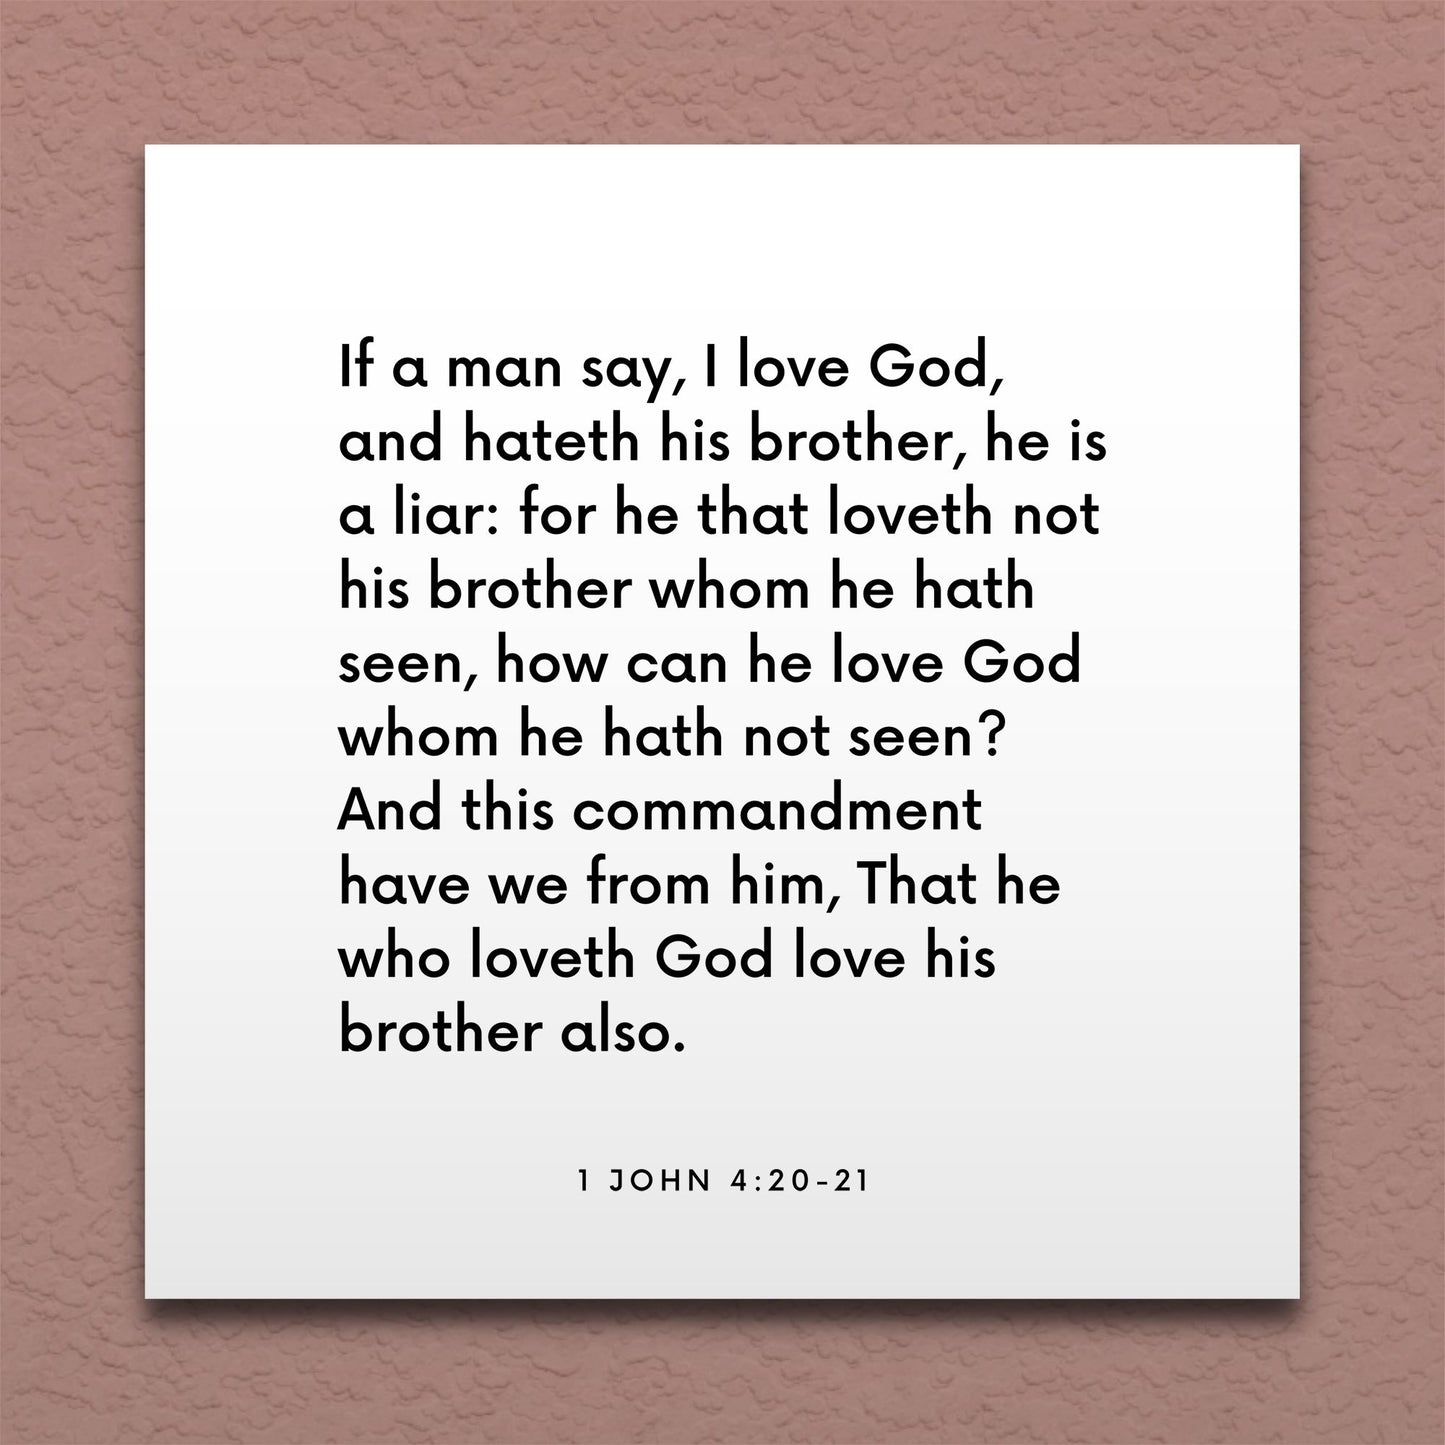 Wall-mounted scripture tile for 1 John 4:20-21 - "He who loveth God love his brother also"